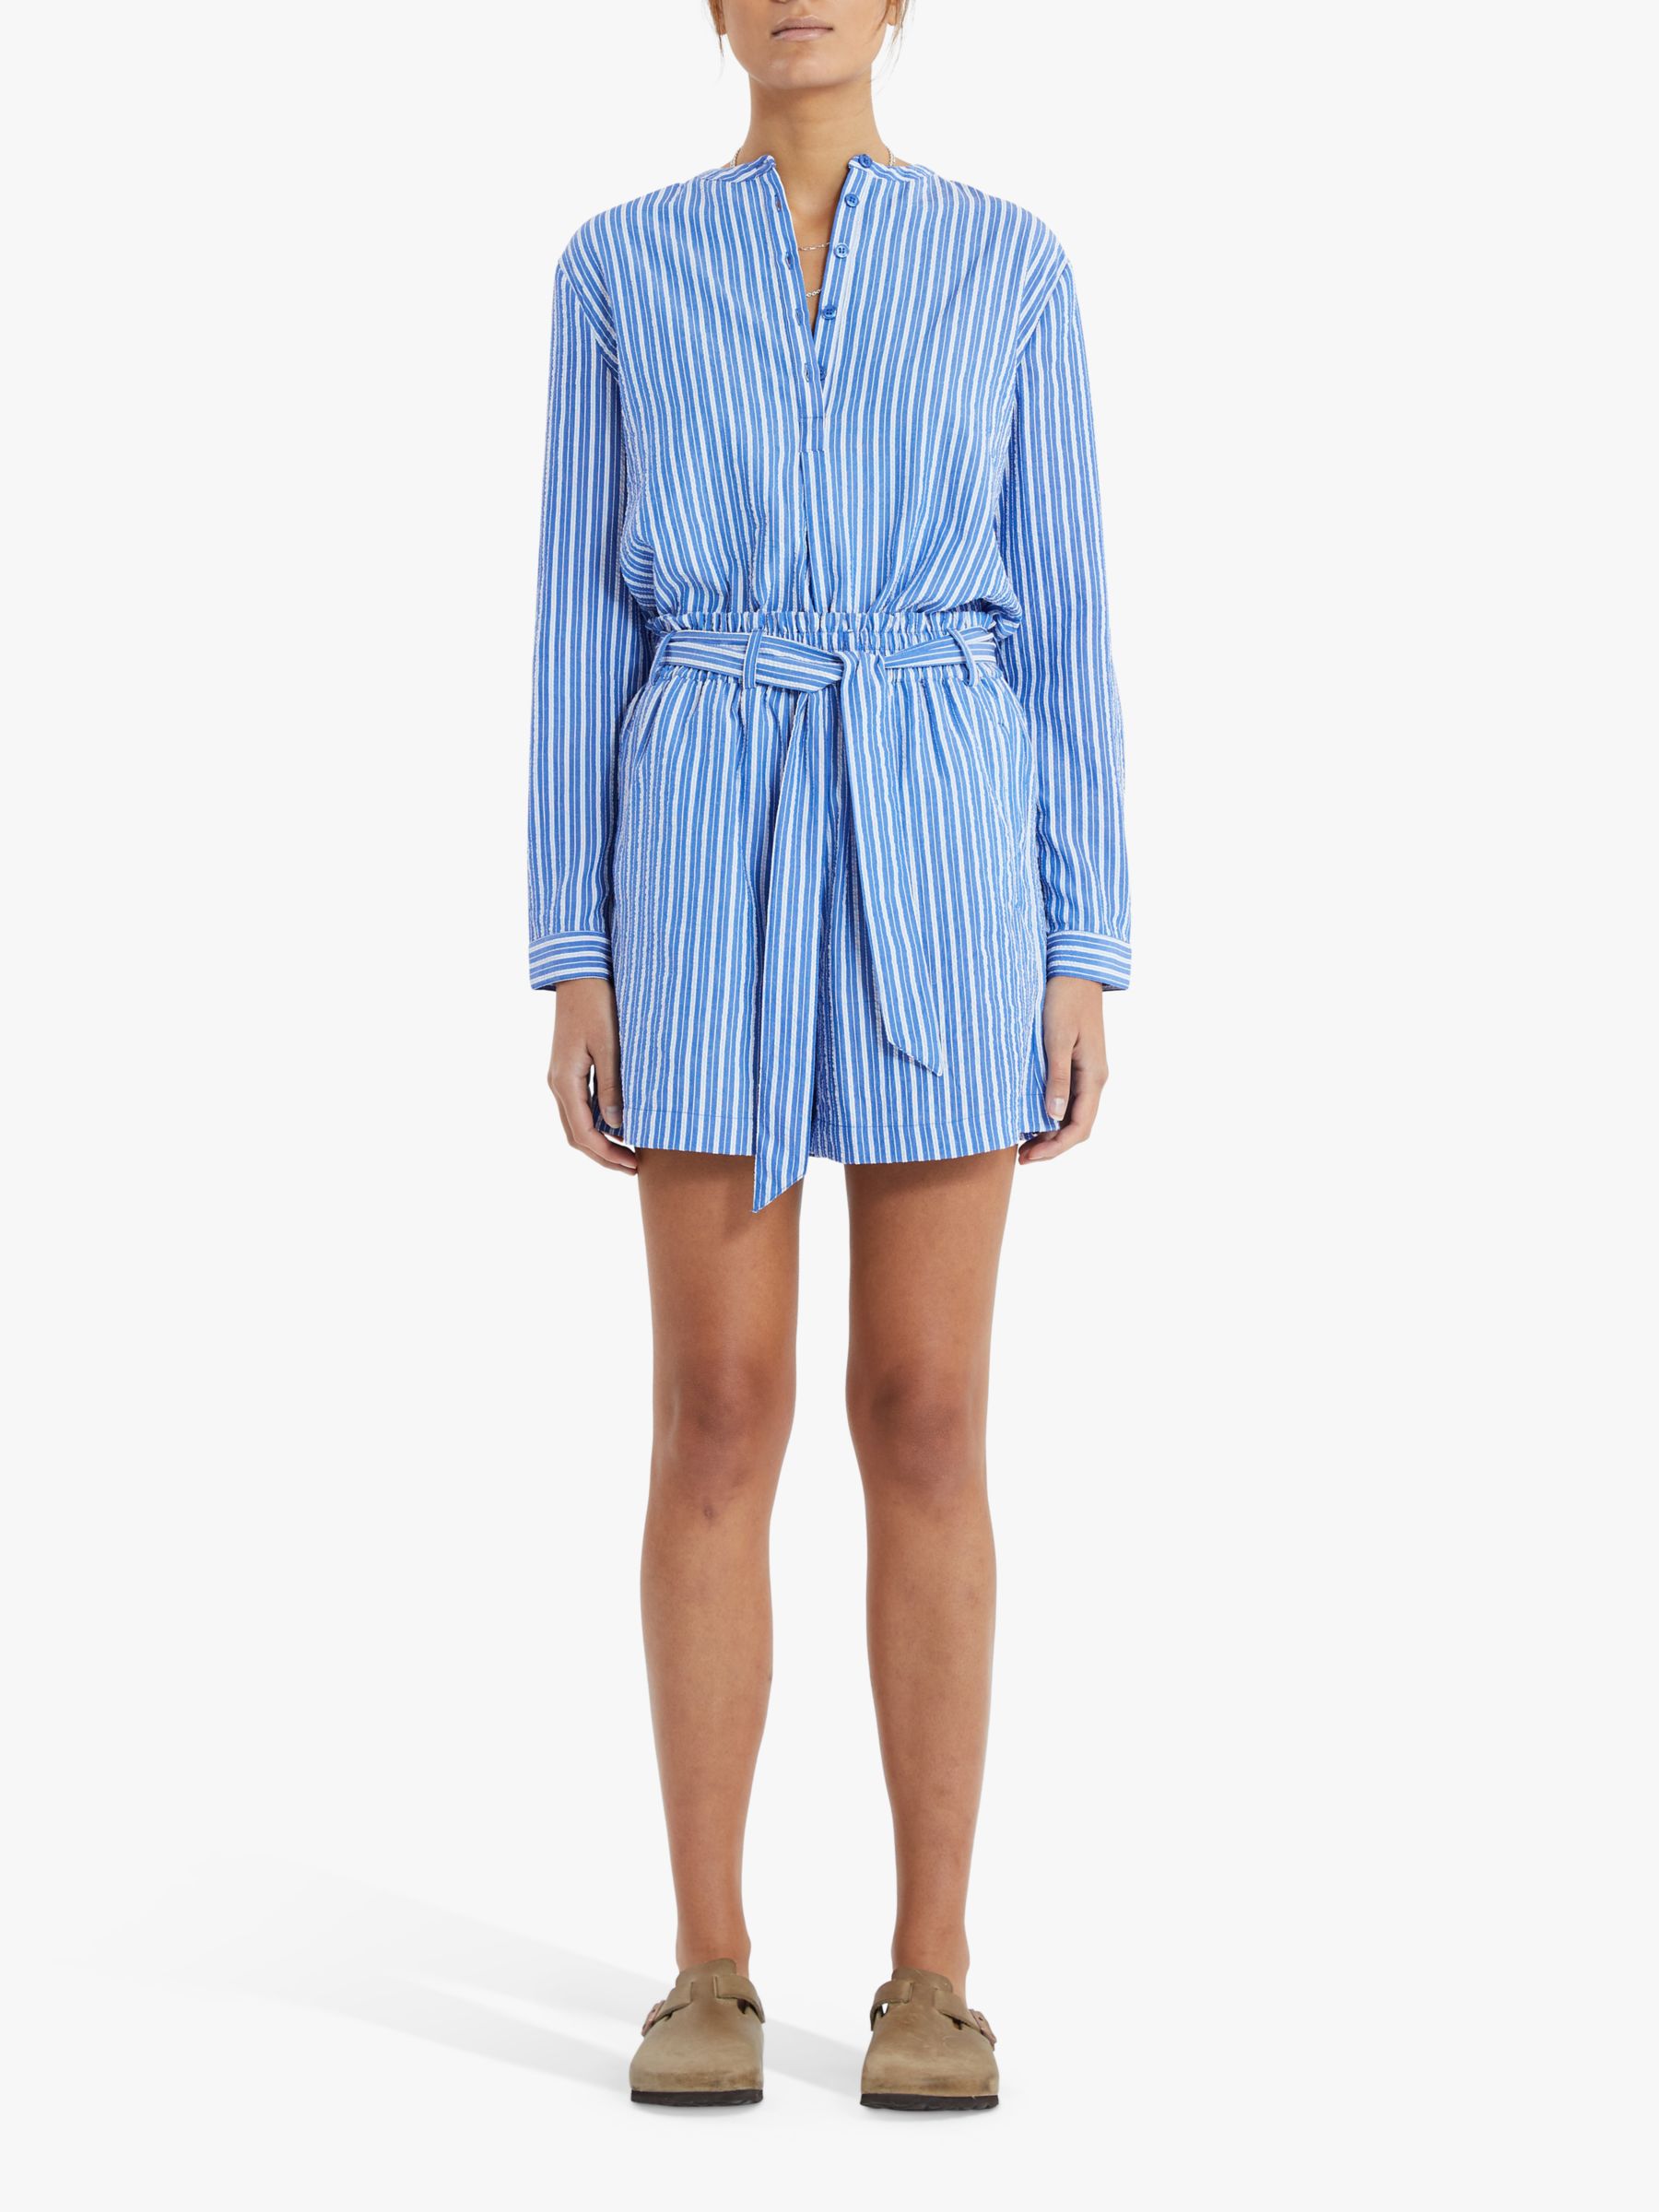 Lollys Laundry Striped Blanca Shorts, Blue at John Lewis & Partners